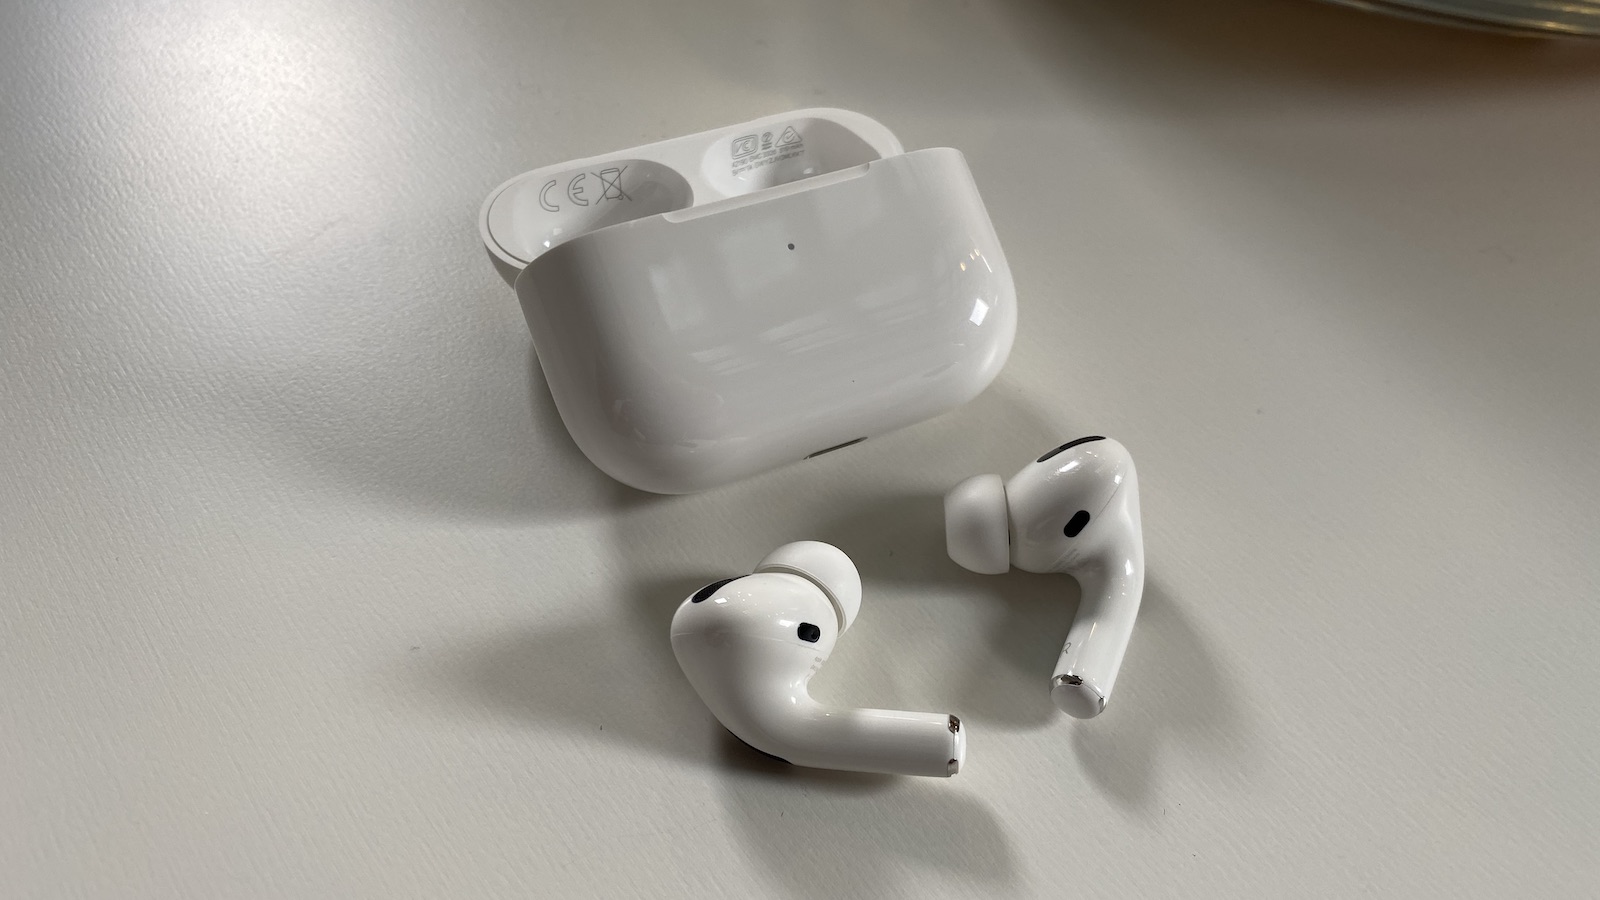 This image shows the AirPods Pro 2 with it's case.